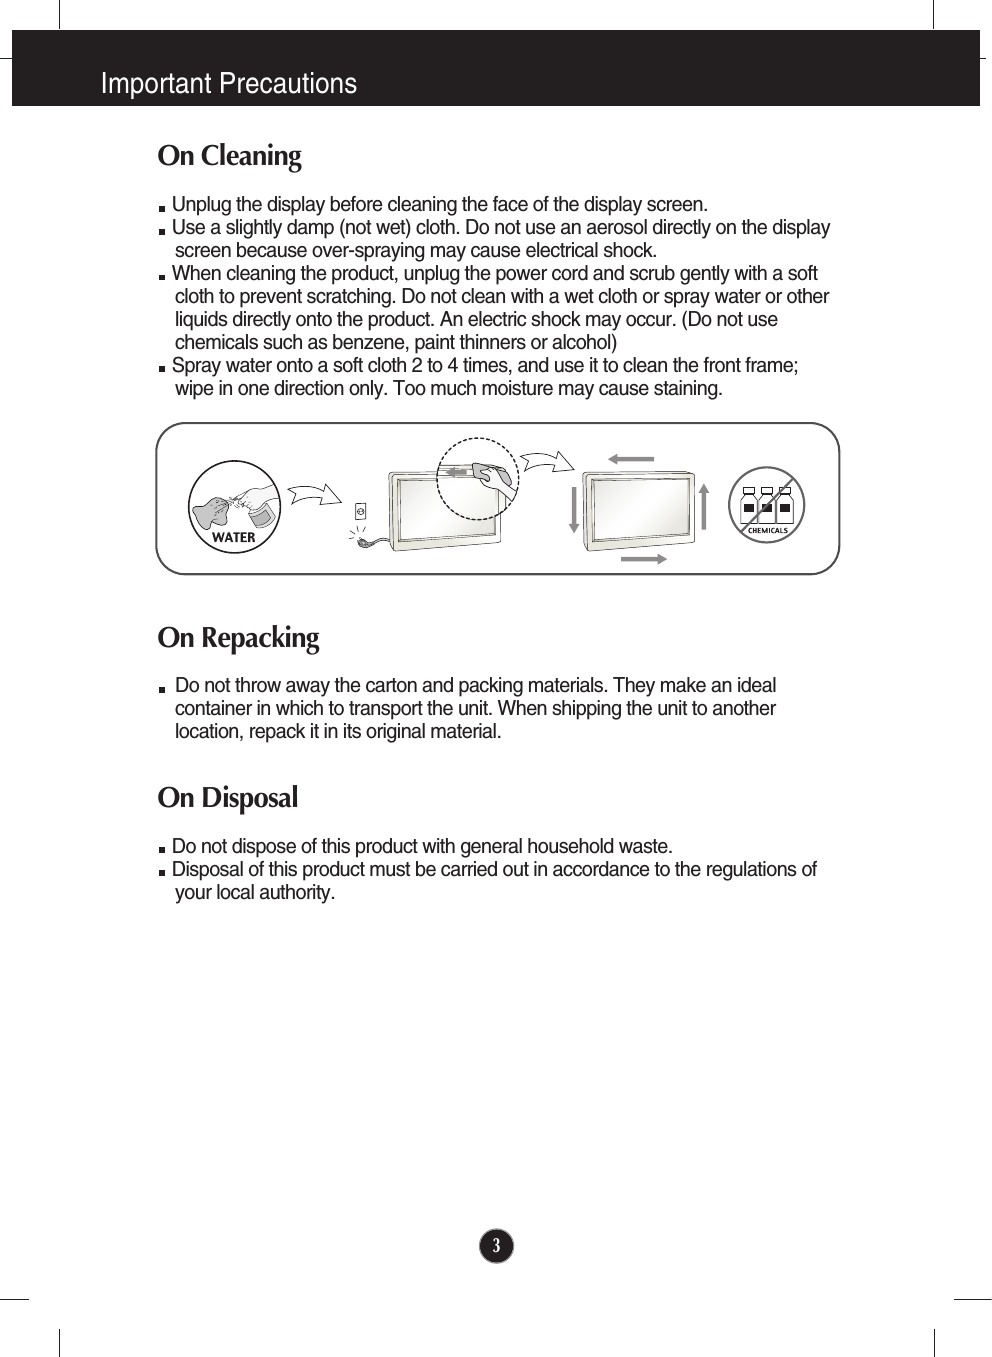 Important Precautions3On CleaningUnplug the display before cleaning the face of the display screen.Use a slightly damp (not wet) cloth. Do not use an aerosol directly on the displayscreen because over-spraying may cause electrical shock.When cleaning the product, unplug the power cord and scrub gently with a softcloth to prevent scratching. Do not clean with a wet cloth or spray water or otherliquids directly onto the product. An electric shock may occur. (Do not usechemicals such as benzene, paint thinners or alcohol) Spray water onto a soft cloth 2 to 4 times, and use it to clean the front frame;wipe in one direction only. Too much moisture may cause staining.  On RepackingDo not throw away the carton and packing materials. They make an idealcontainer in which to transport the unit. When shipping the unit to anotherlocation, repack it in its original material.On DisposalDo not dispose of this product with general household waste.Disposal of this product must be carried out in accordance to the regulations ofyour local authority.